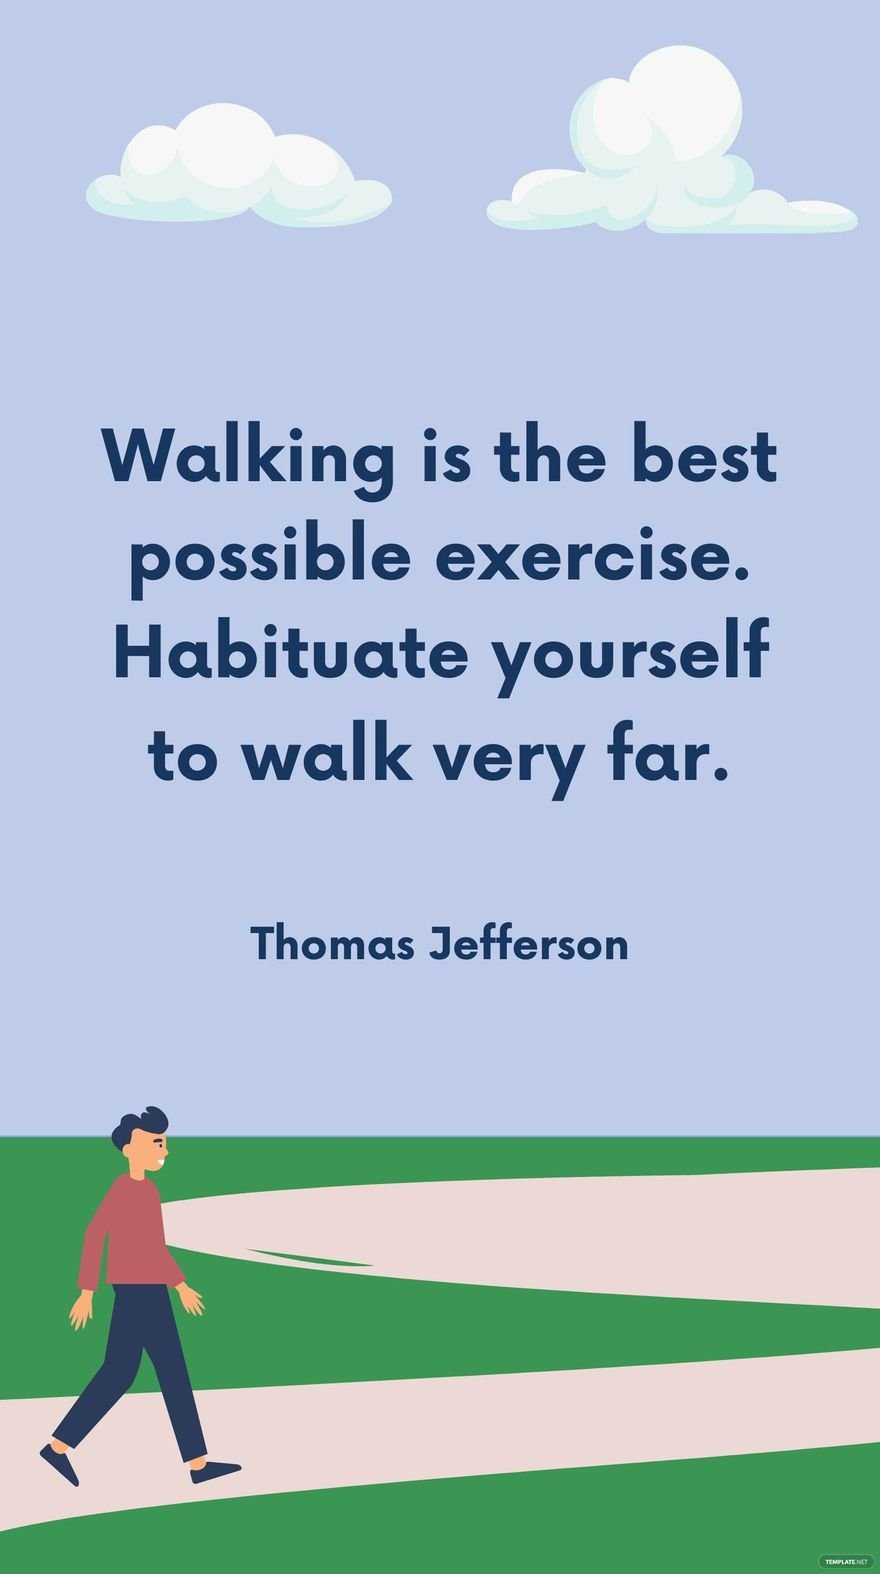 Free Thomas Jefferson - Walking is the best possible exercise. Habituate yourself to walk very far. in JPG